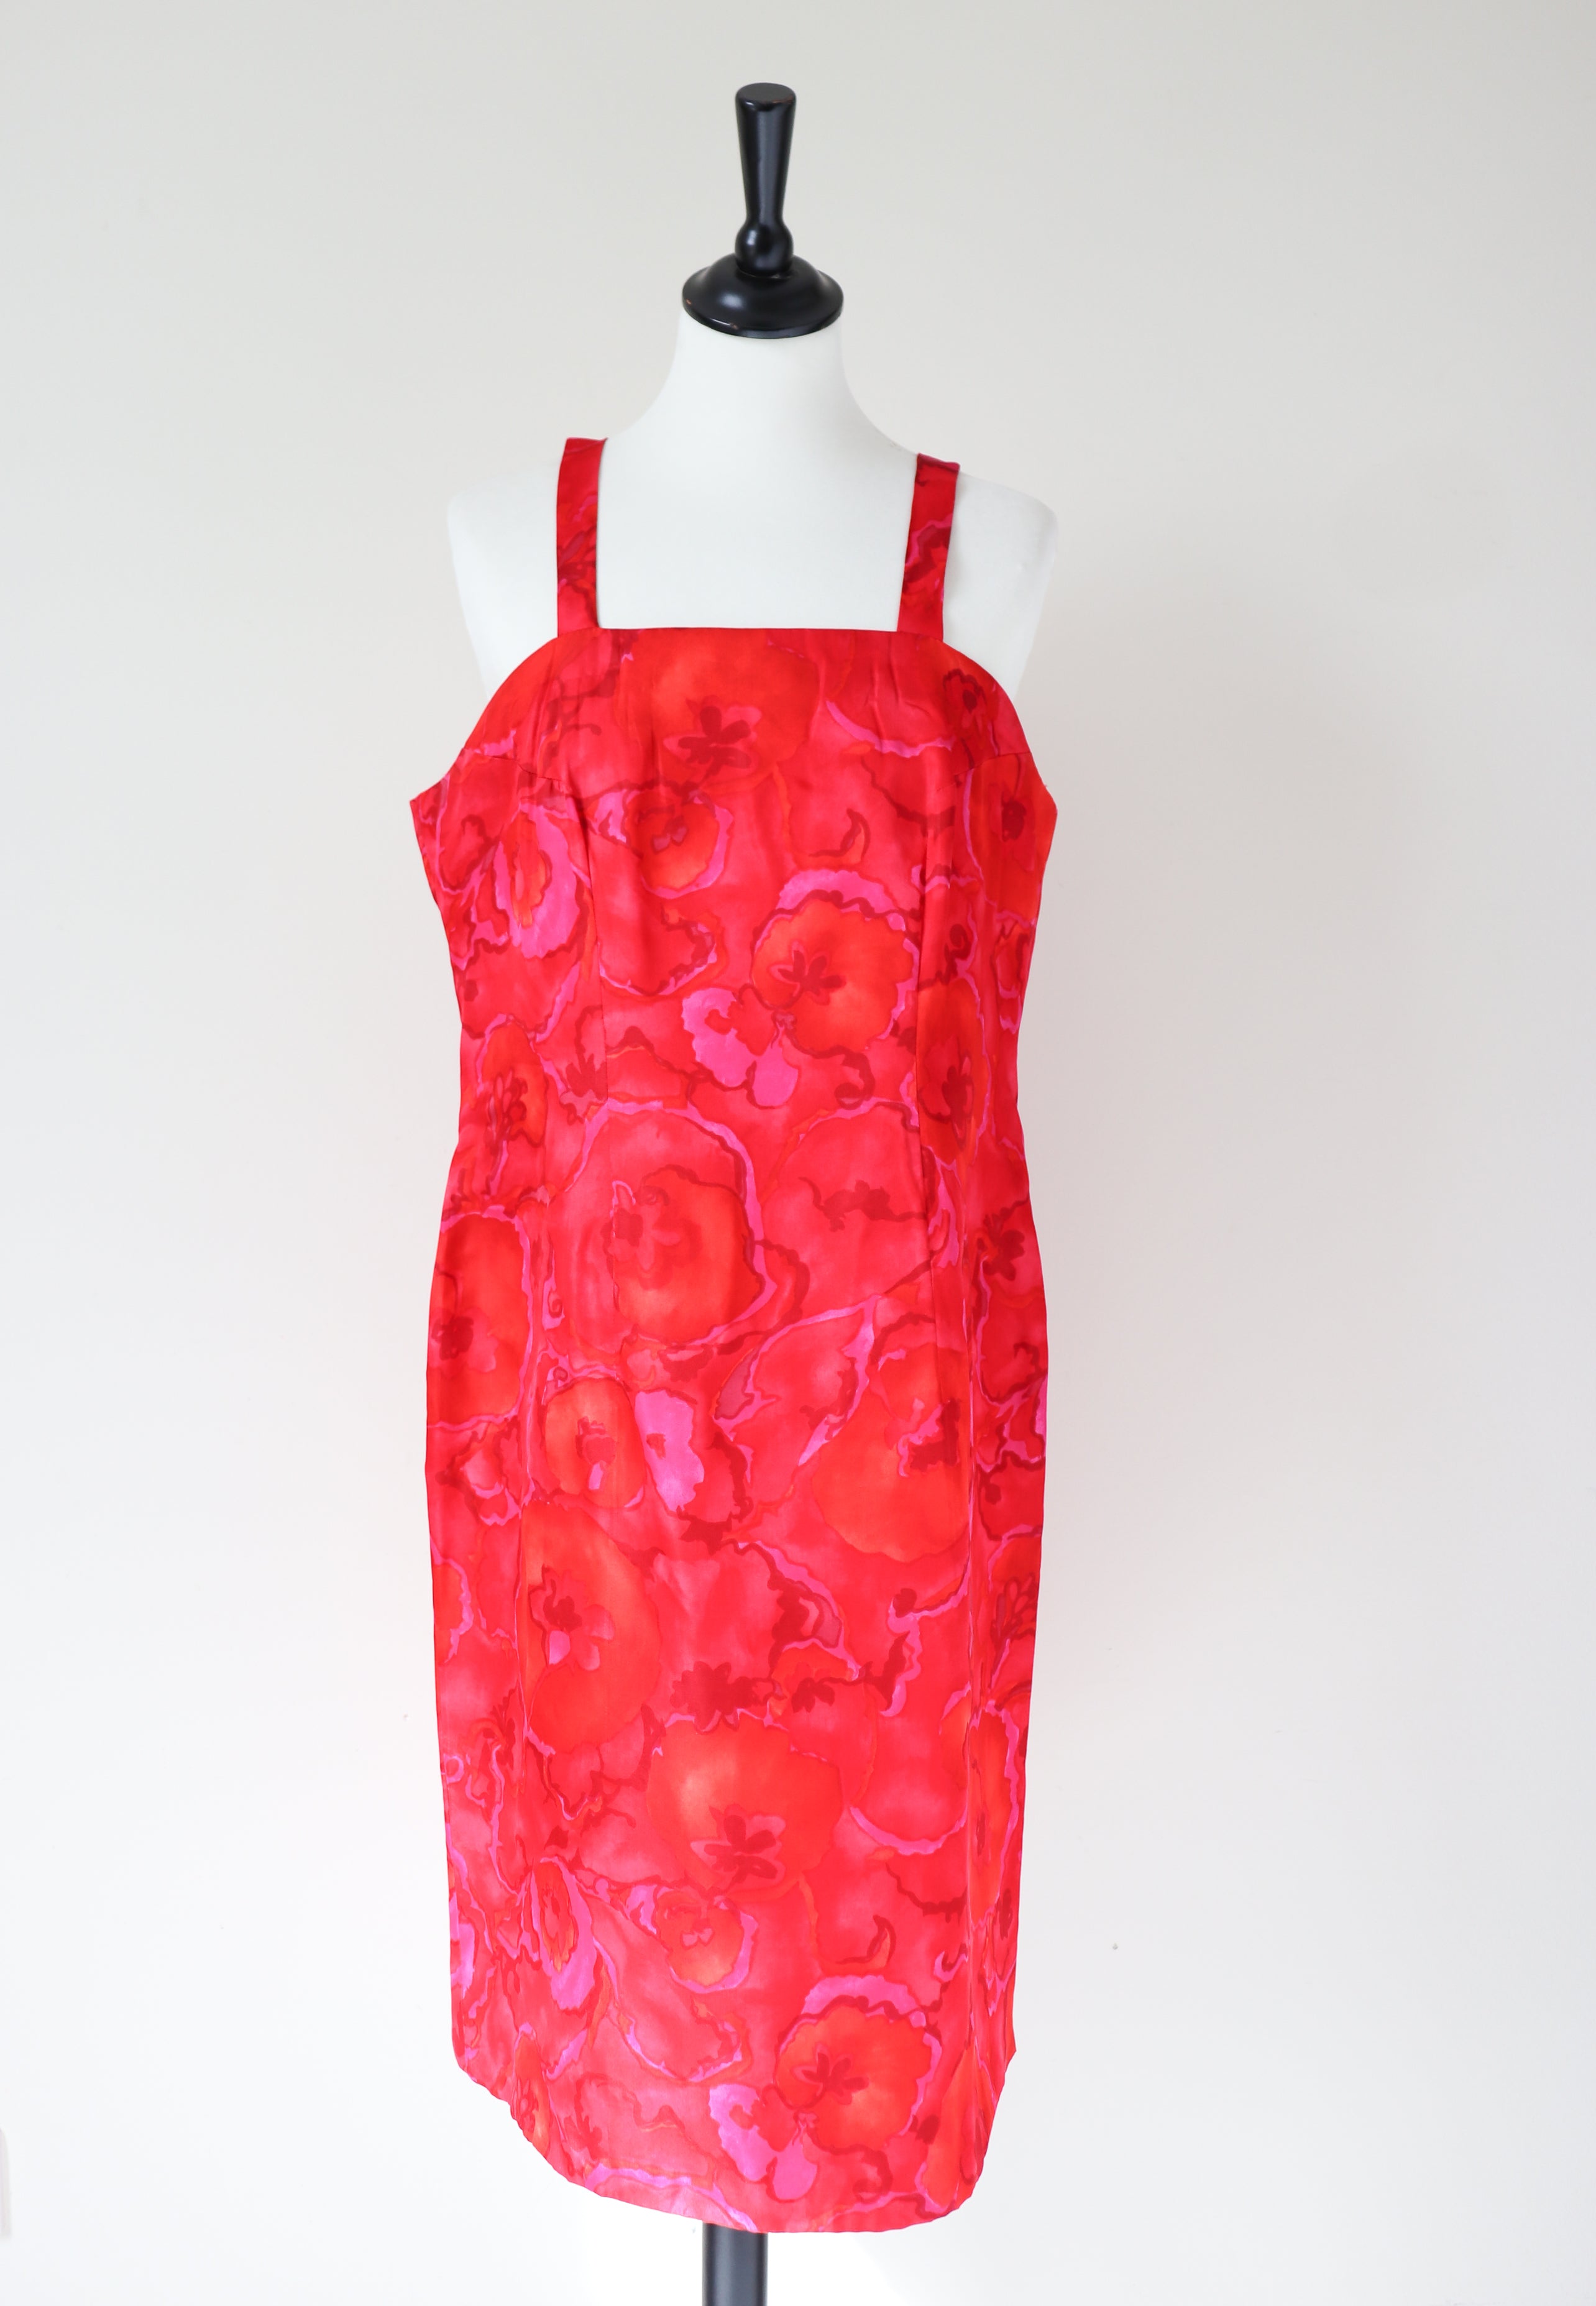 1960s Hand Made Cocktail Dress - Red Floral - Acetate - Strappy - M / L - UK 12 / 14